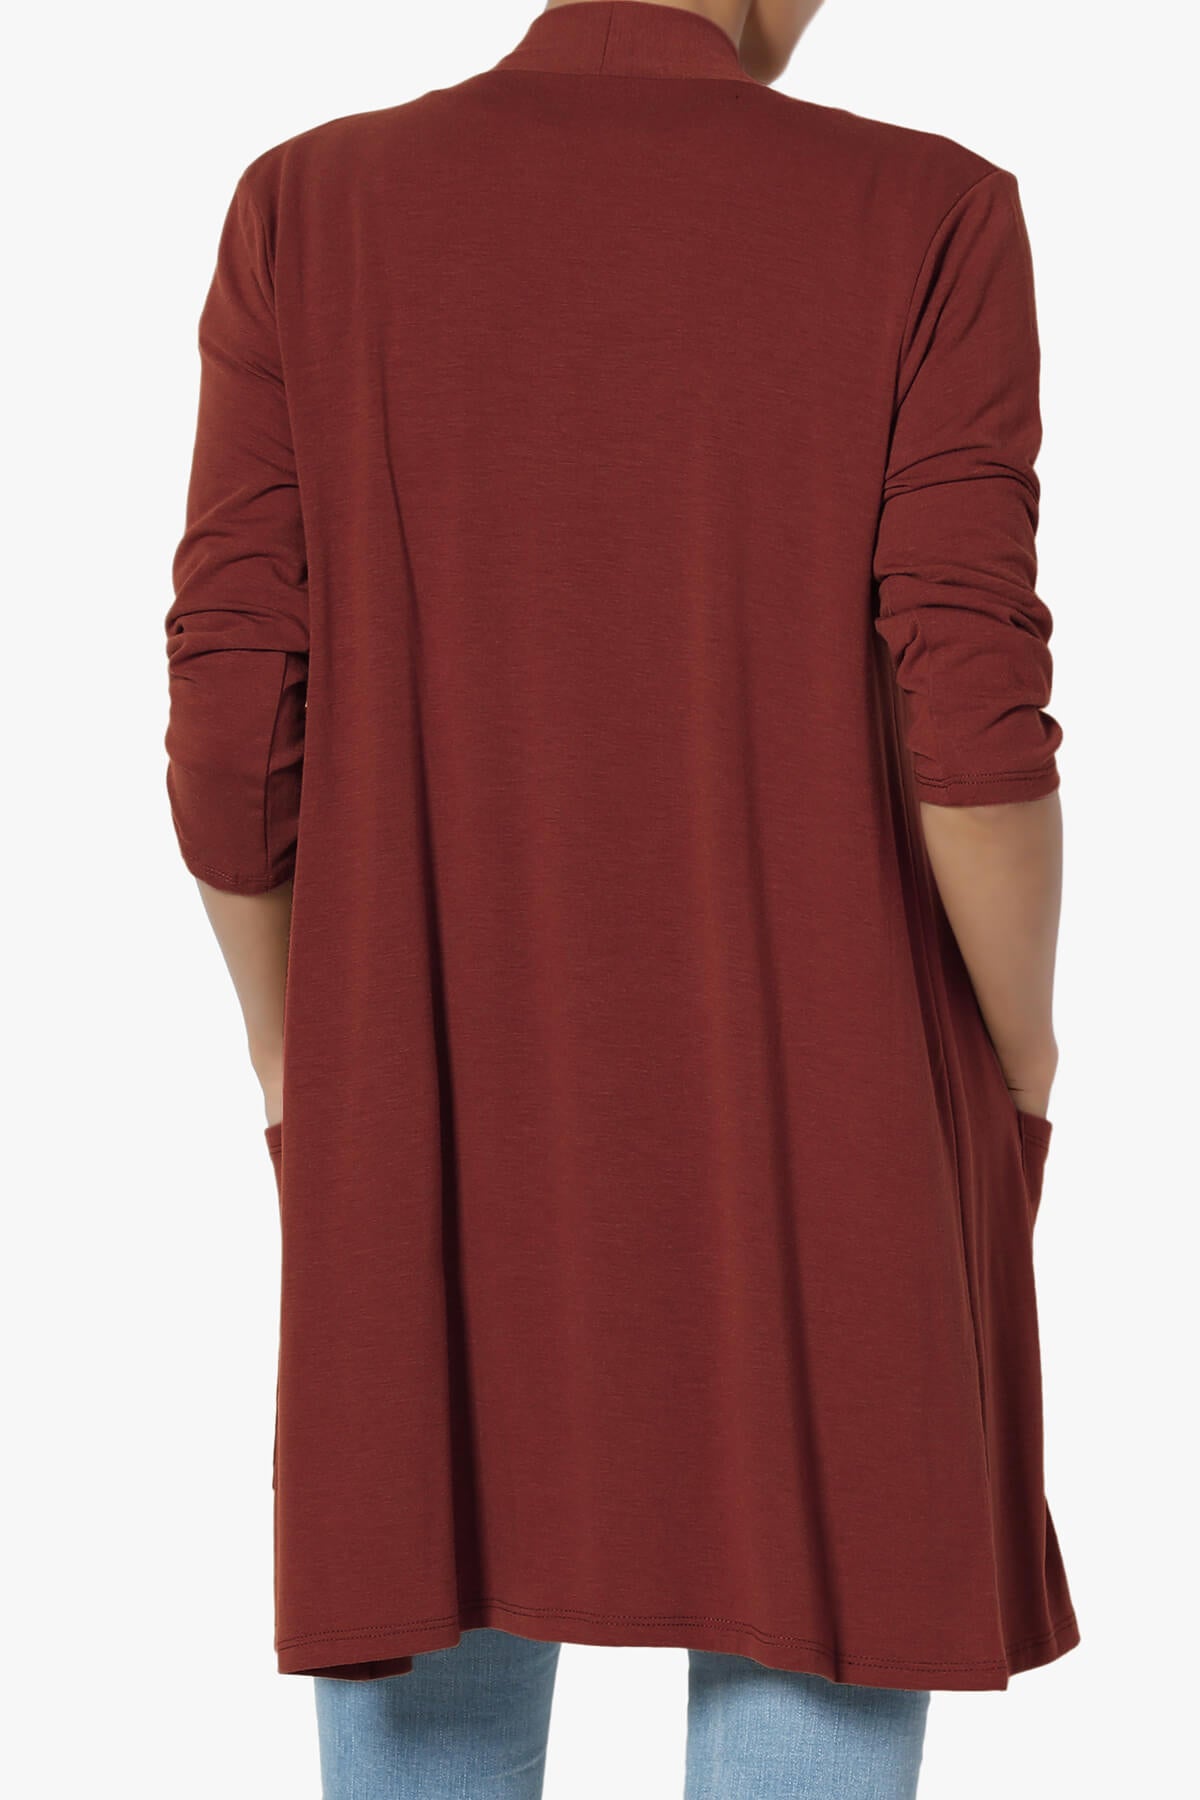 Load image into Gallery viewer, Daday Slouchy Pocket 3/4 Sleeve Cardigan BRICK_2
